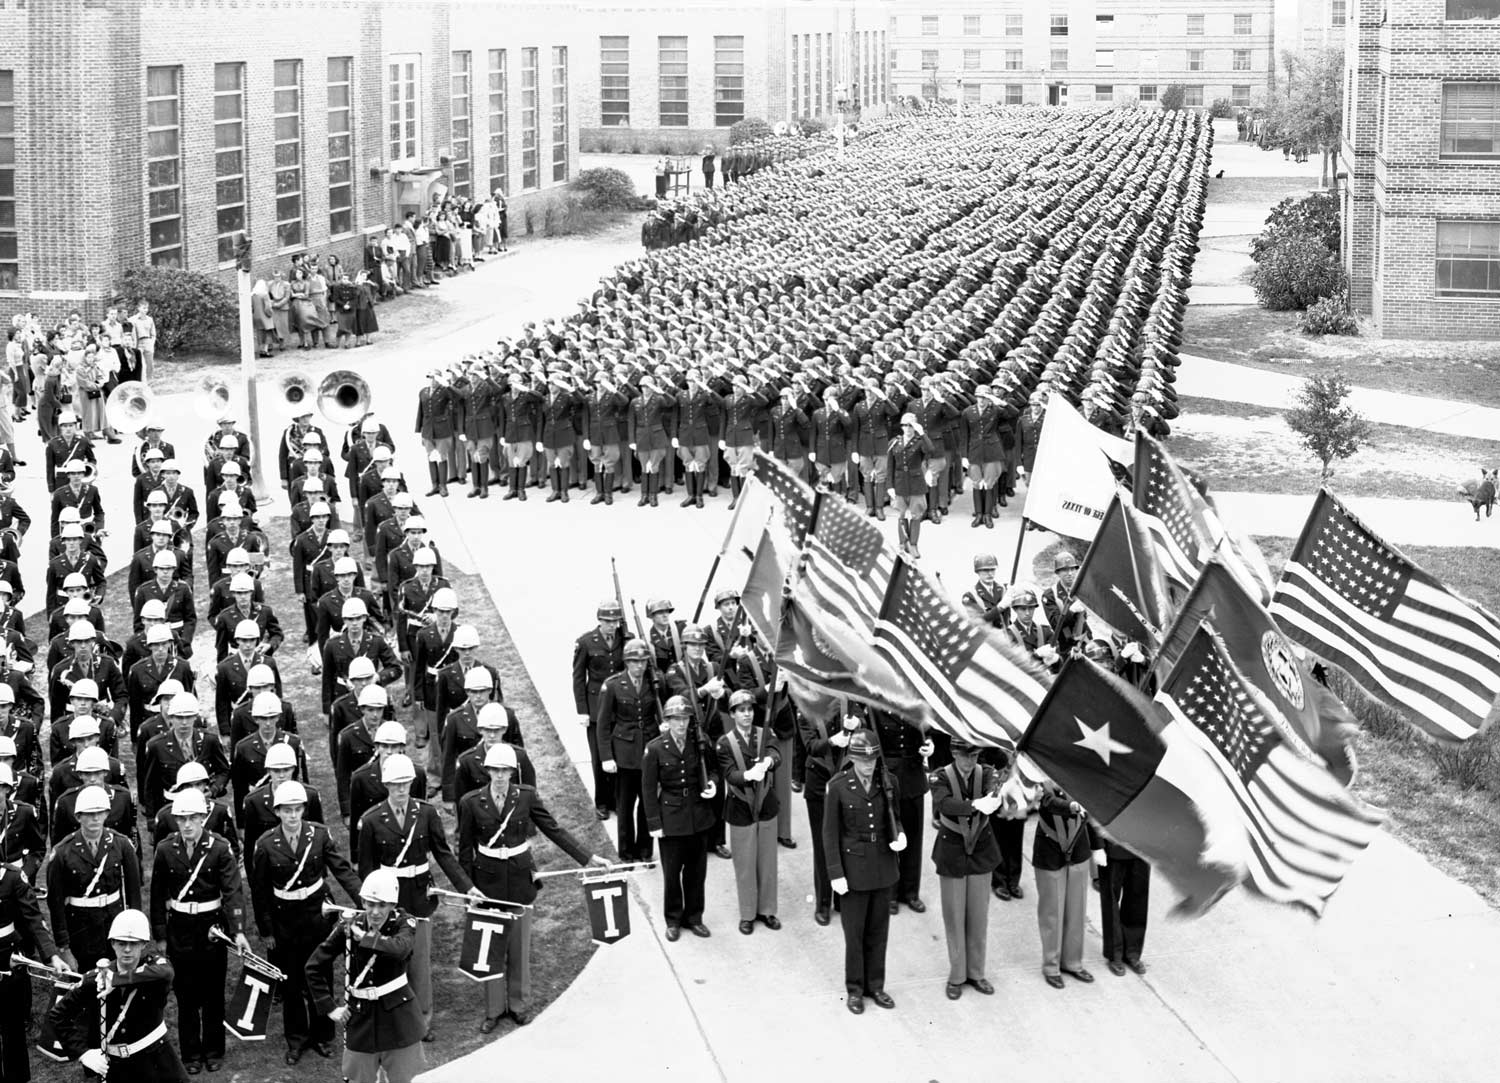 historical image of the Aggie Band on campus